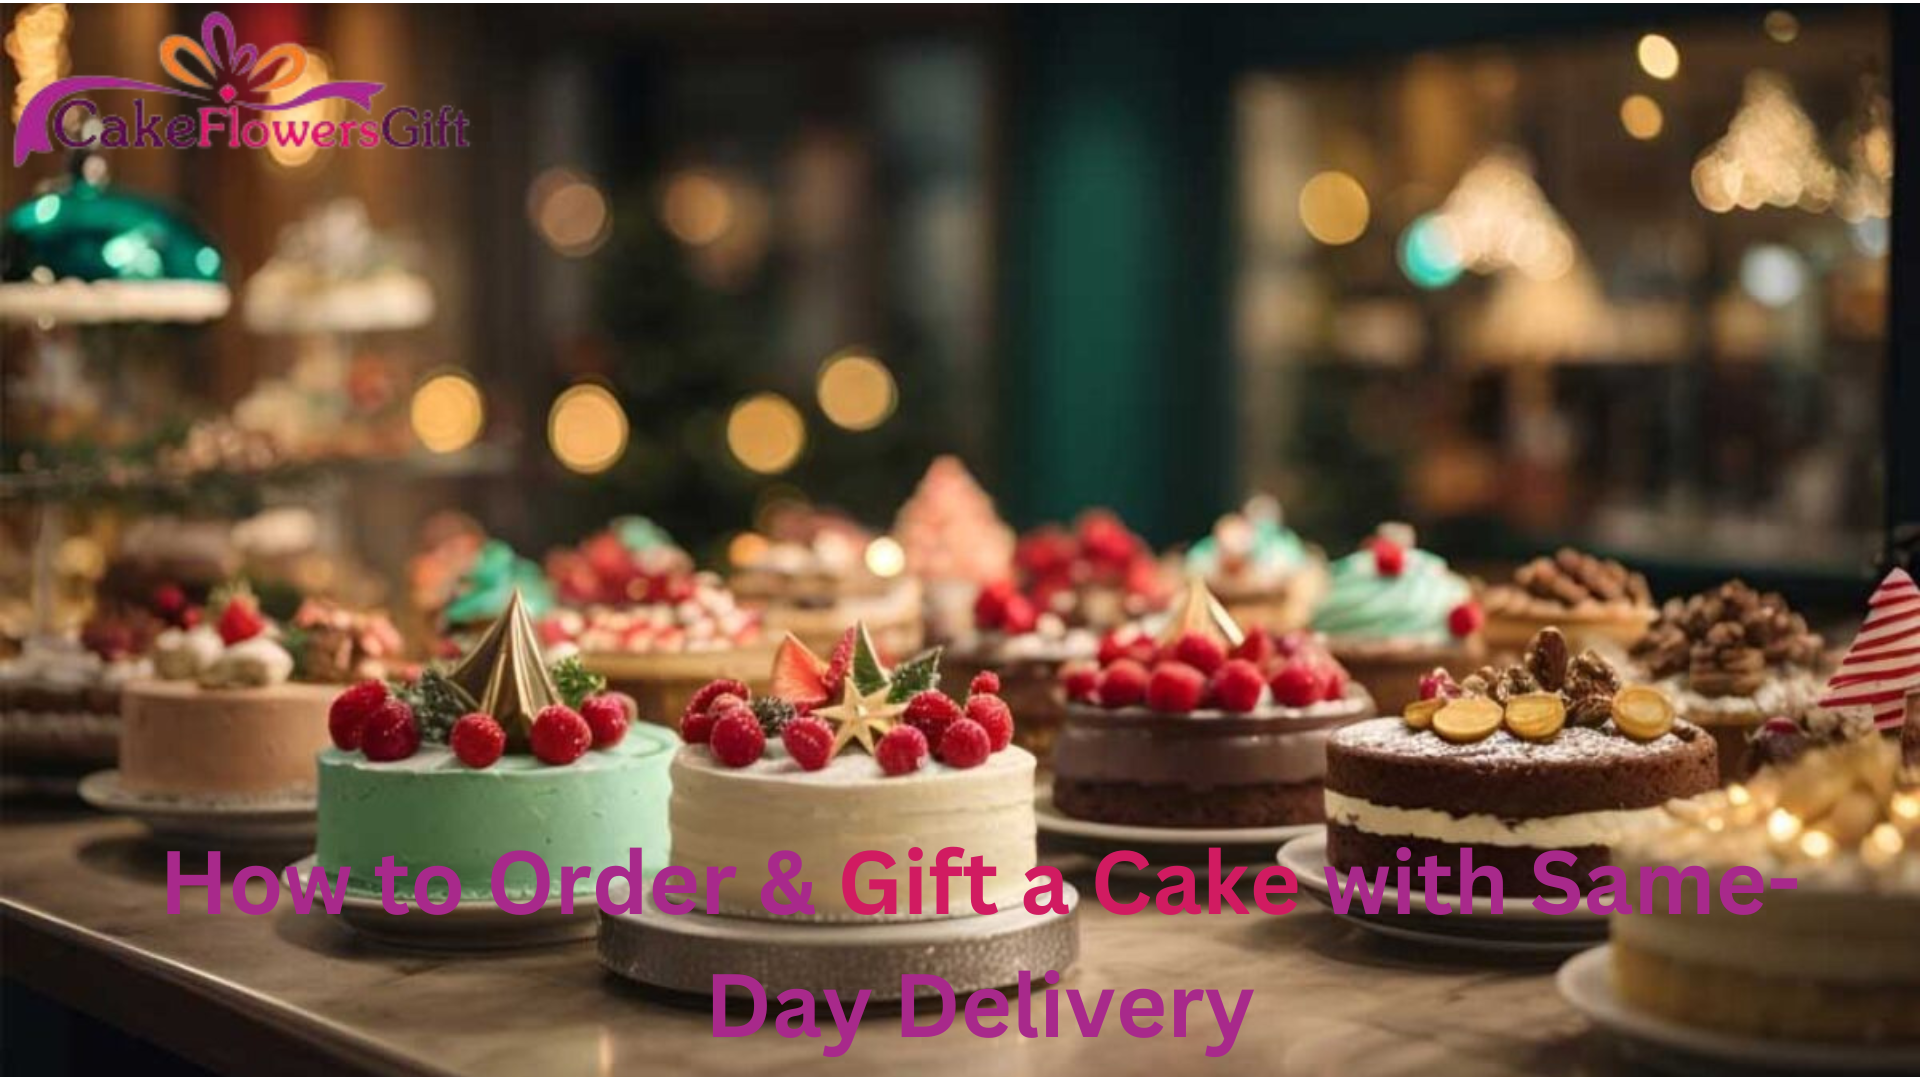 How to Order & Gift a Cake with Same Day Delivery?